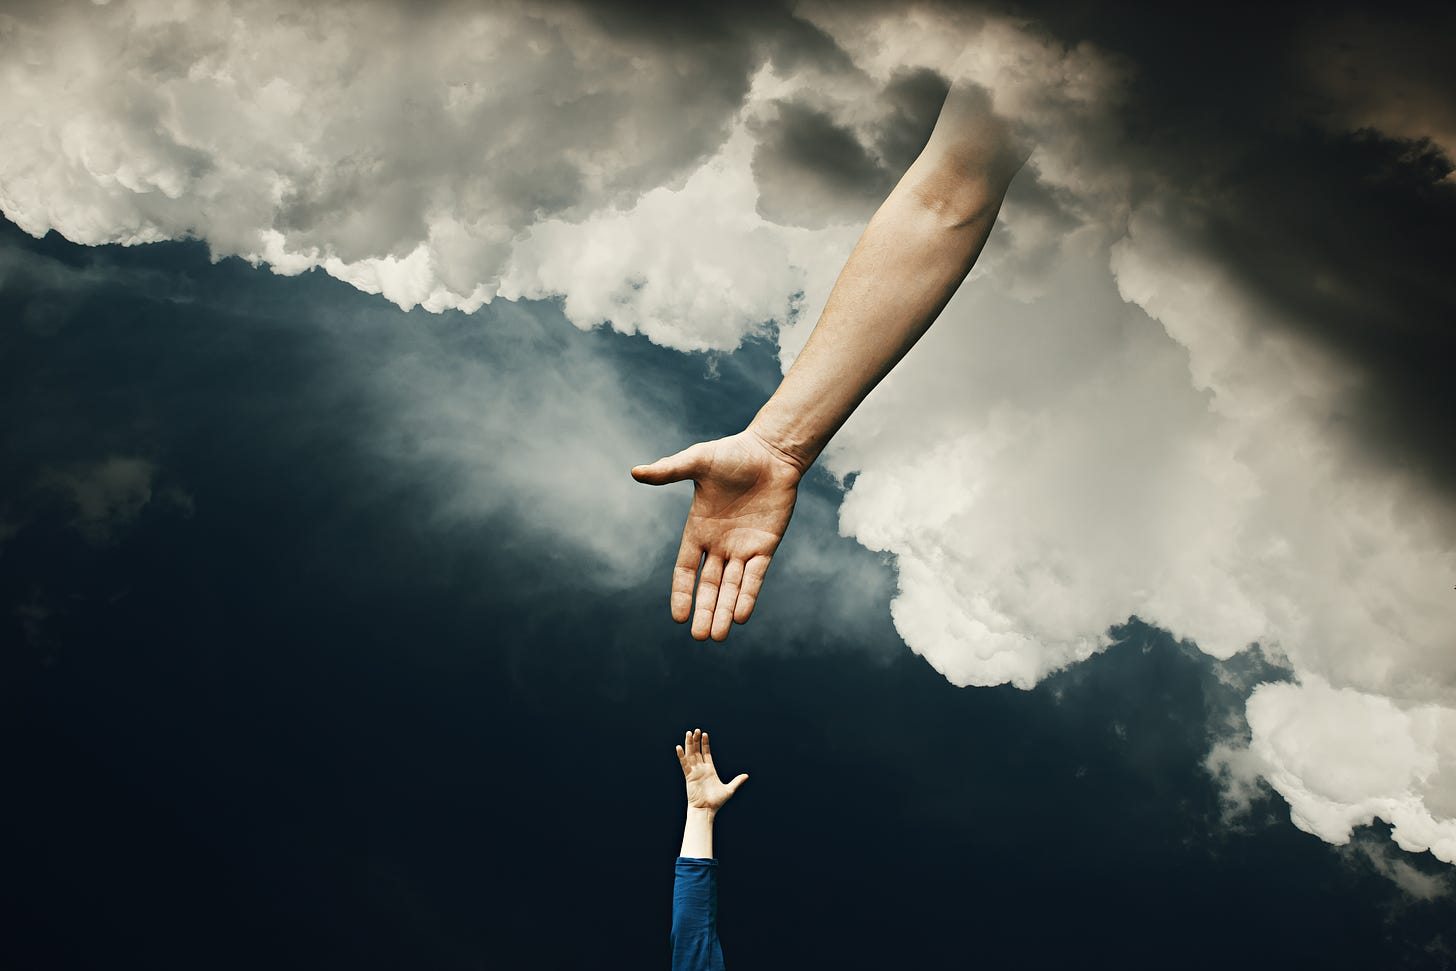 in a stormy blue sky there are gray clouds. out of the sea a small hand rises up. a larger hand reaches down from the clouds. both hands are white